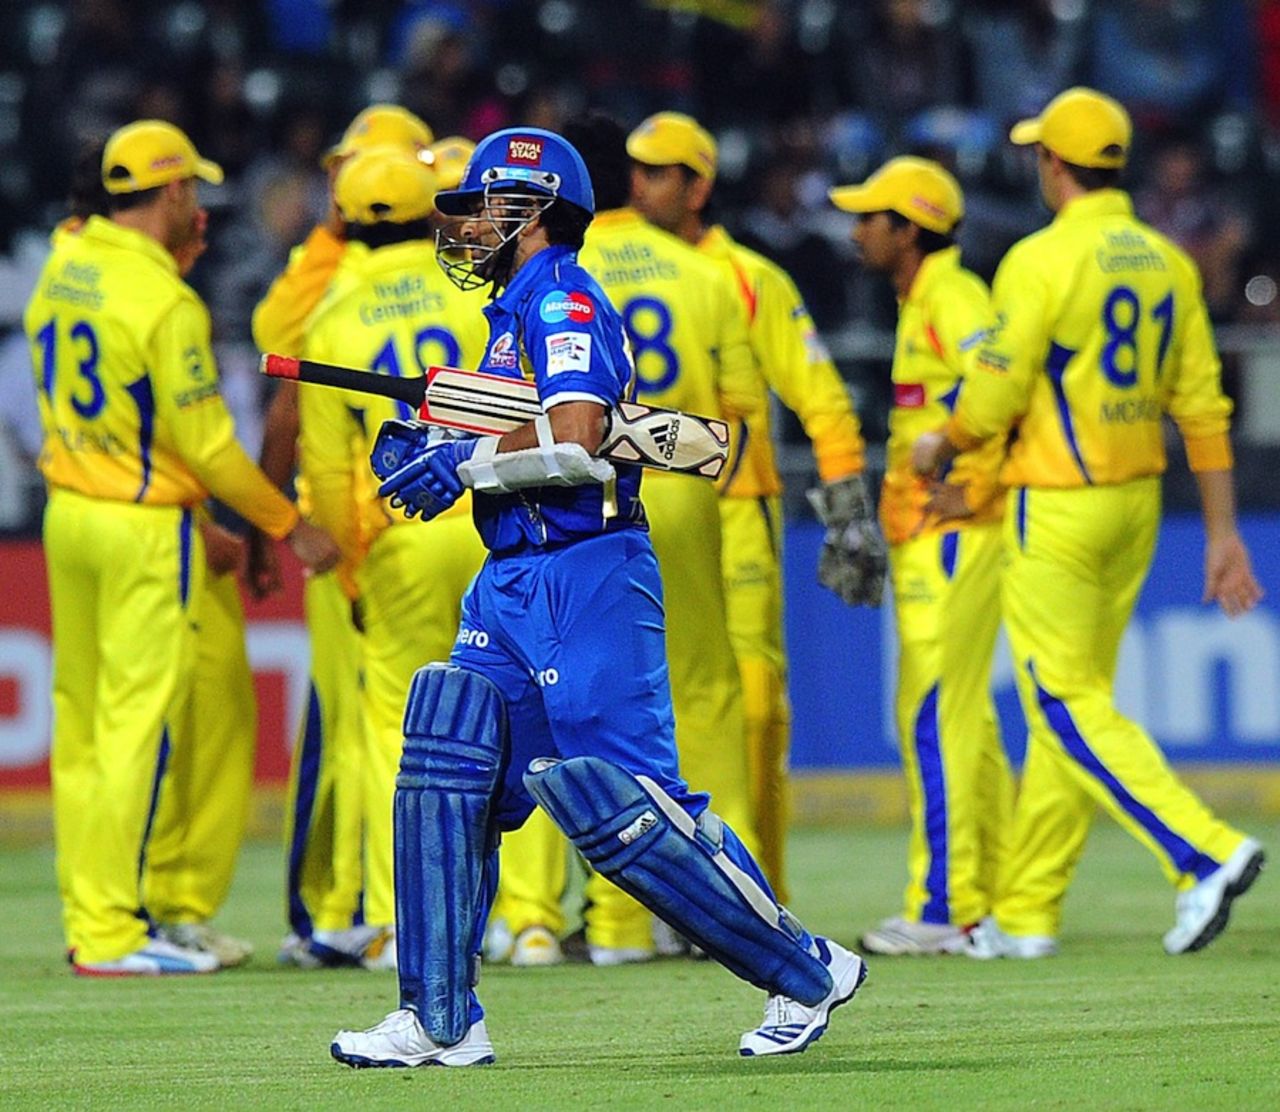 Sachin Tendulkar walks back after another disappointing day with the bat, Chennai Super Kings v Mumbai Indians, Group B, Champions League T20, October 20, 2012 